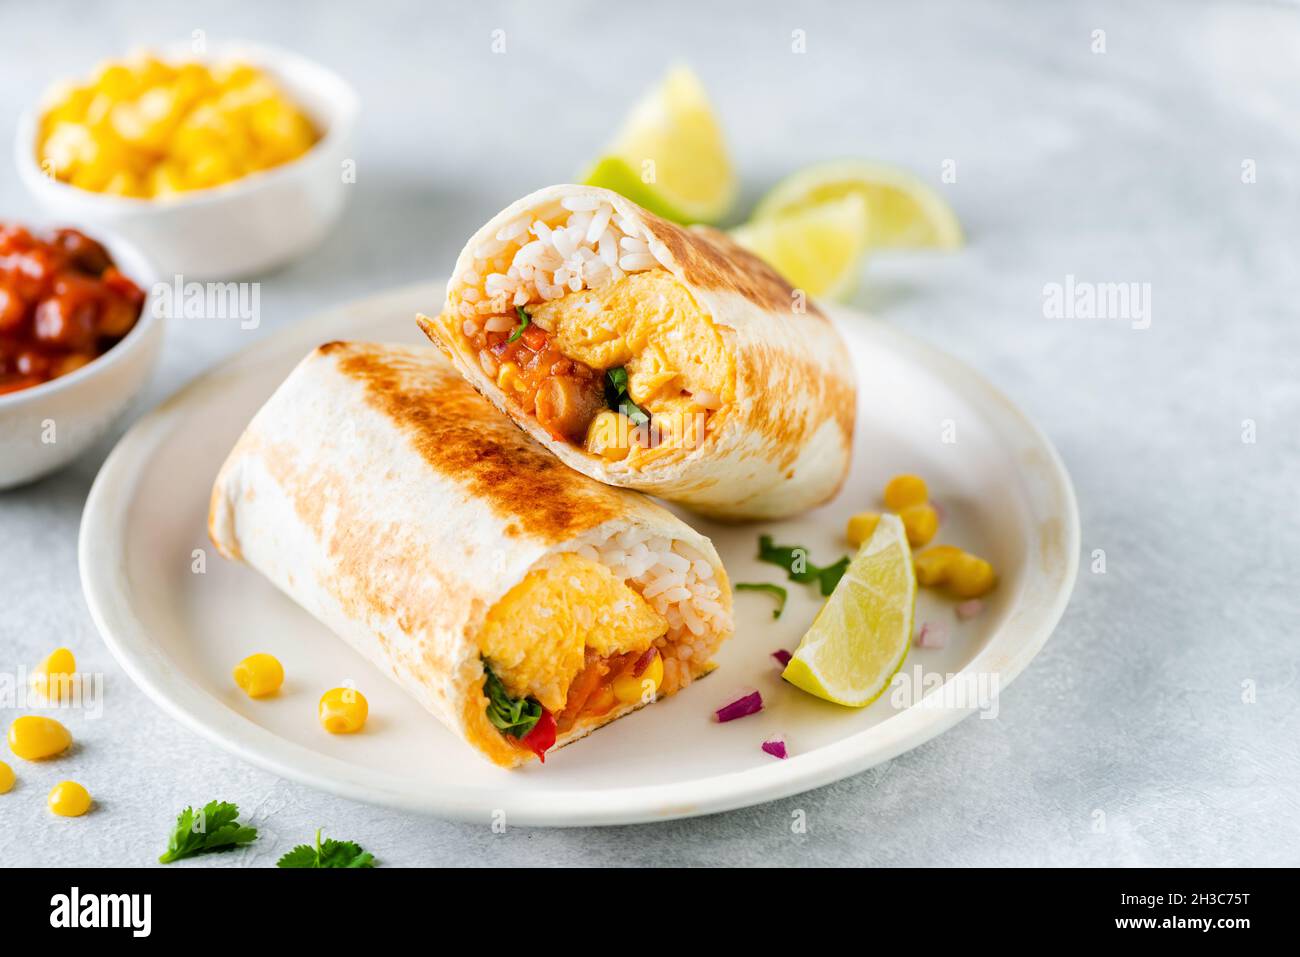 Breakfast tortilla wrap with omelet, beans and vegetables. No meat burrito sandwich Stock Photo